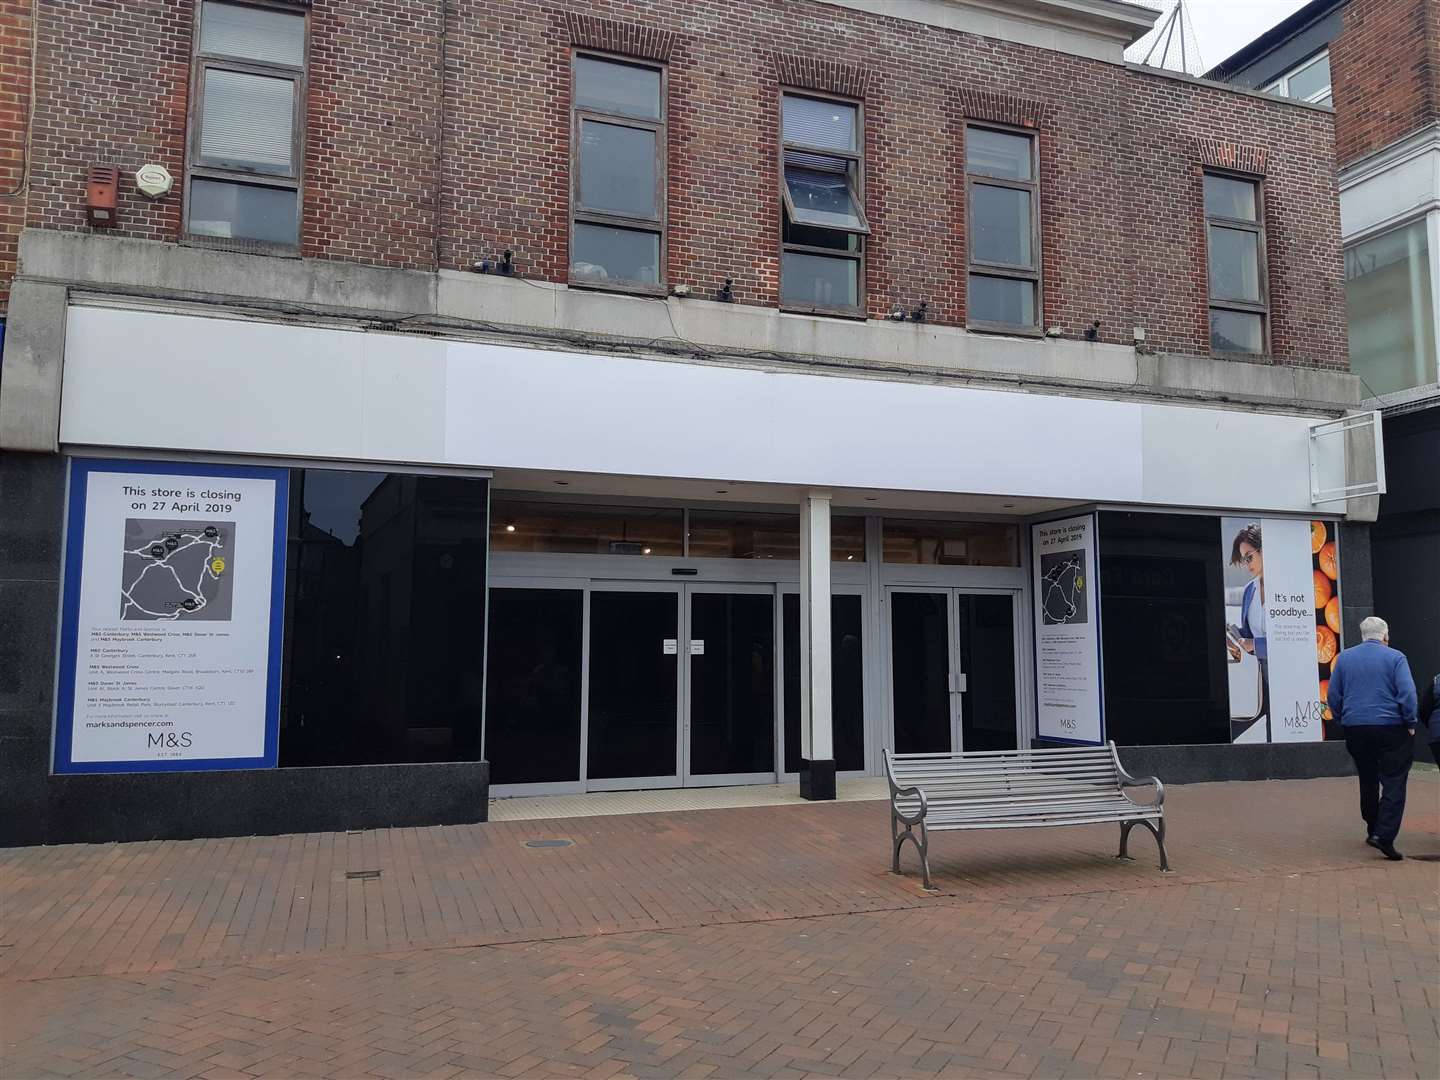 The empty M&S store which closed in April 2019